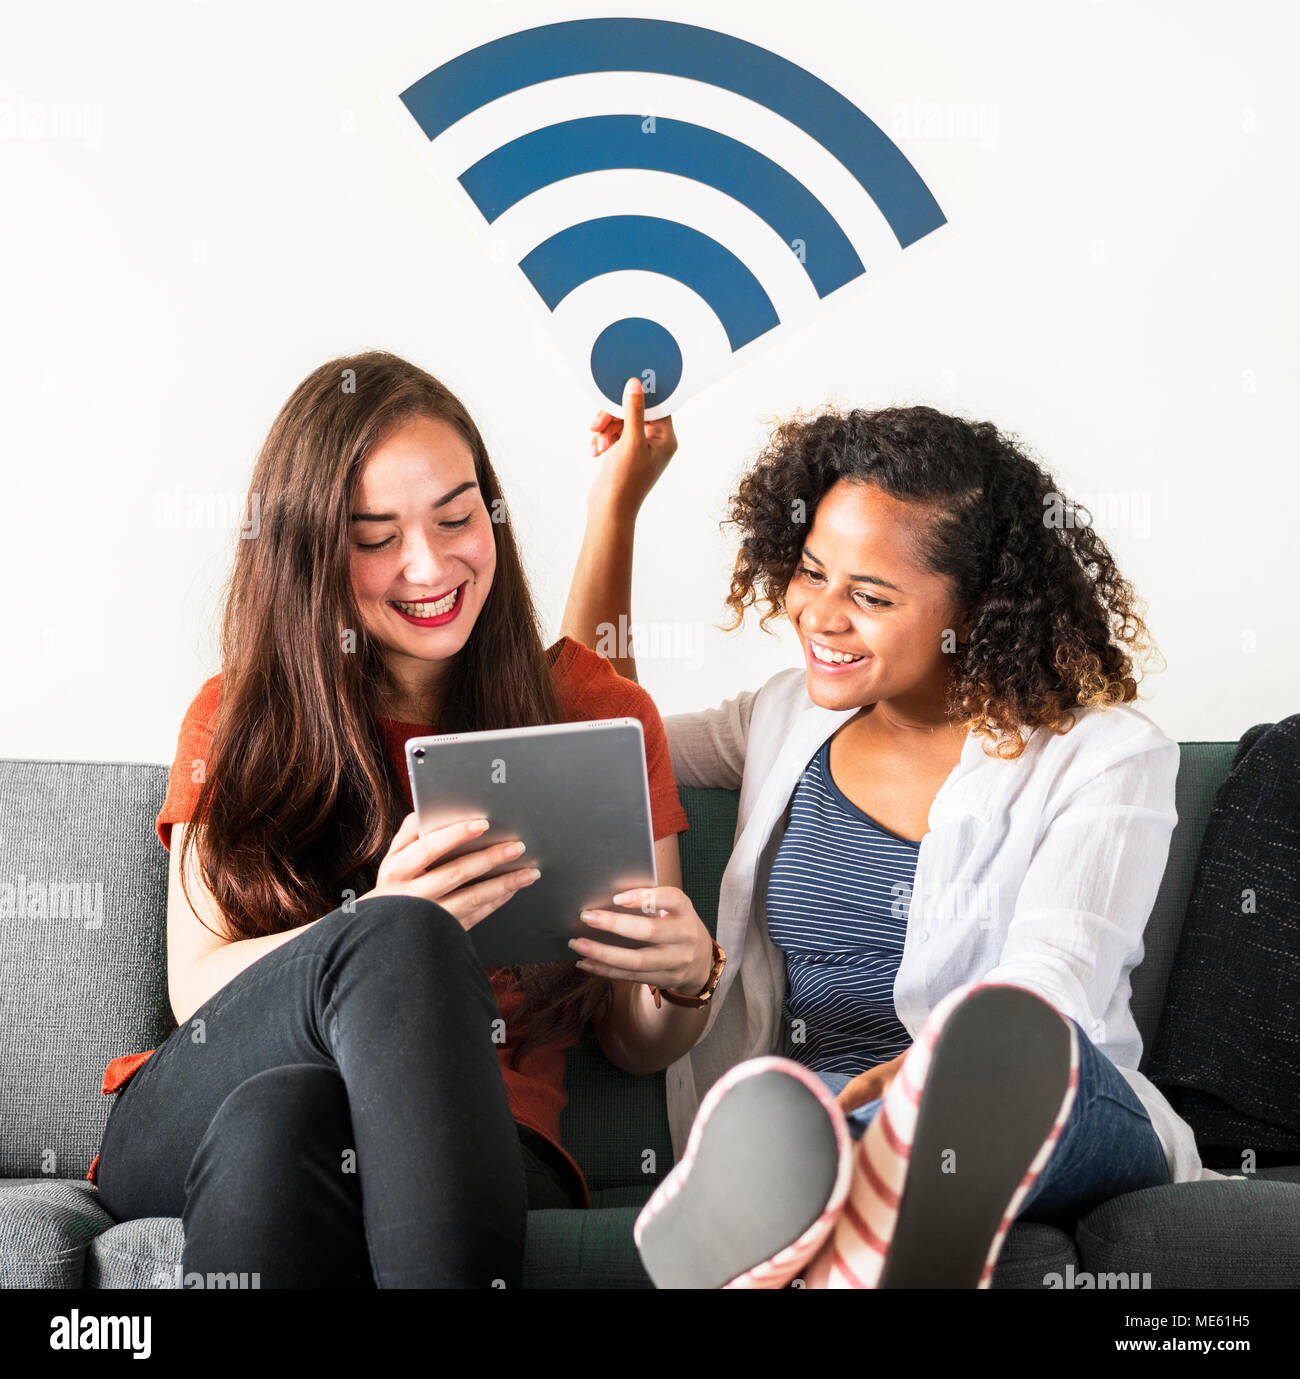 Friends with wifi signal icon Stock Photo